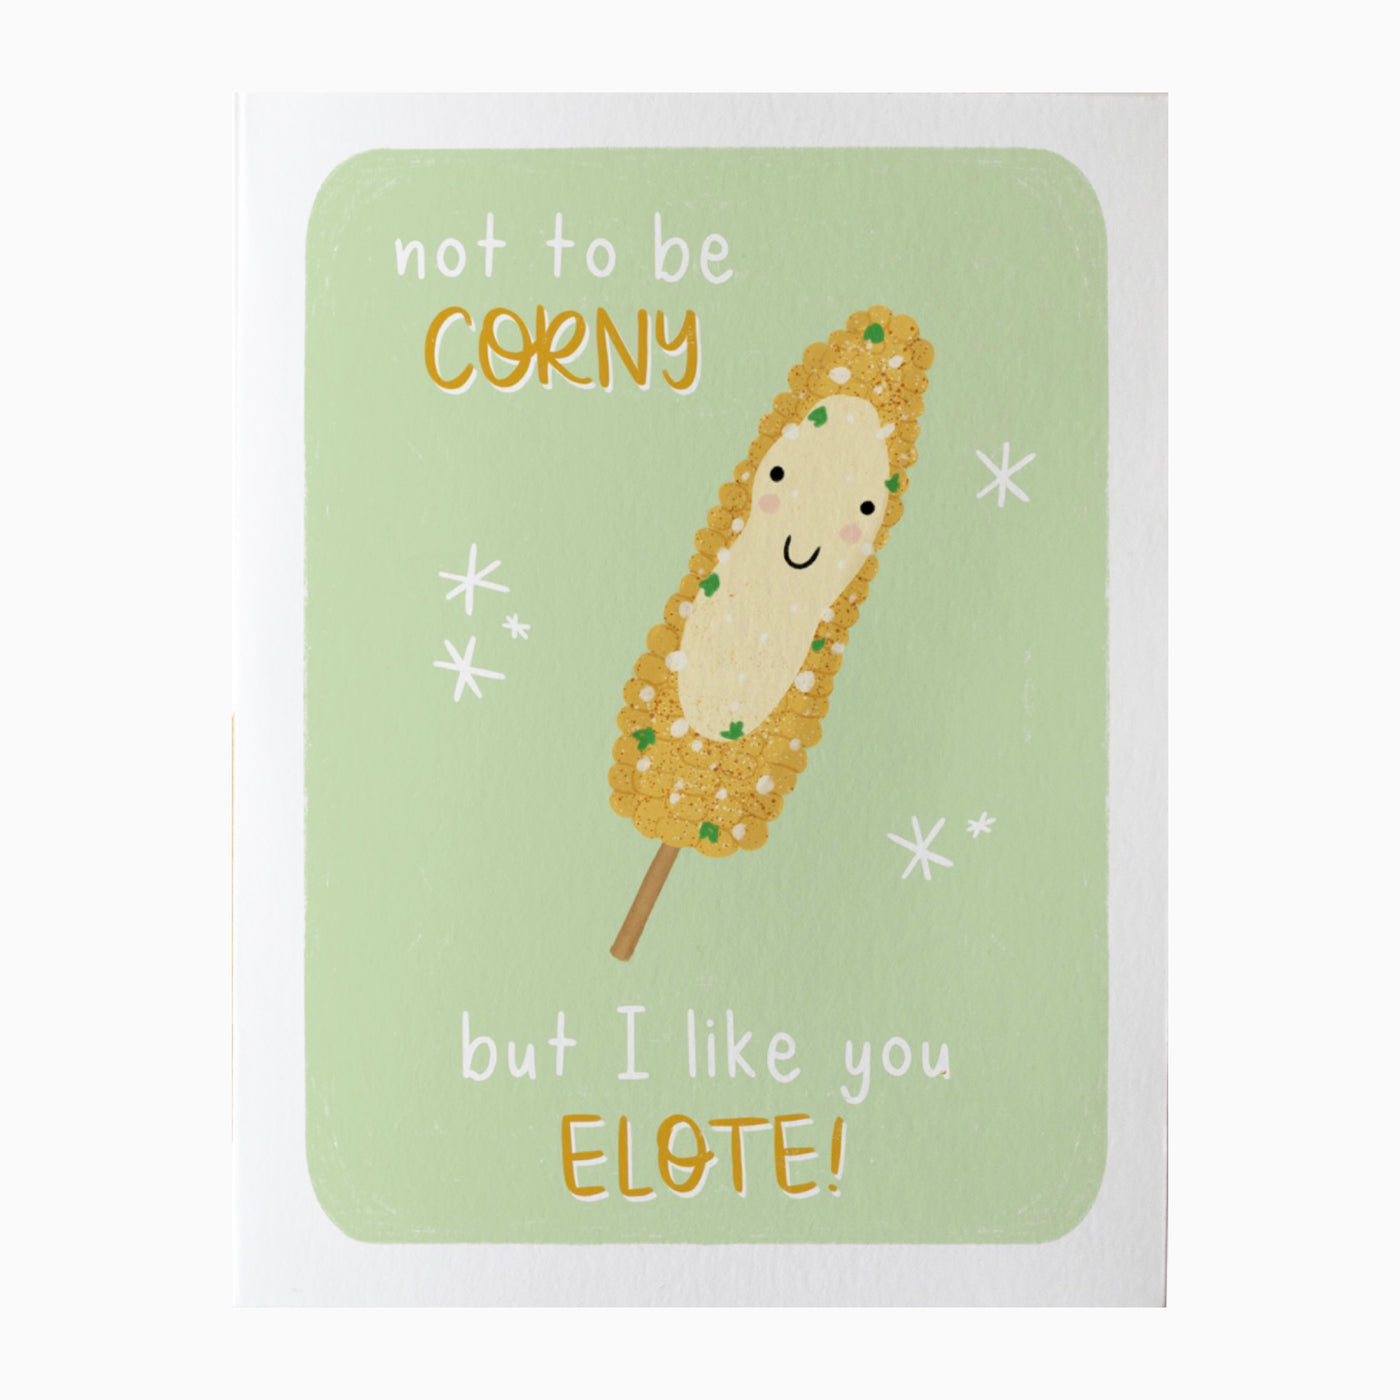 Light green card with a white border featuring a Mexican street corn on the cob with the phrase Not to be corny but I like you elote.